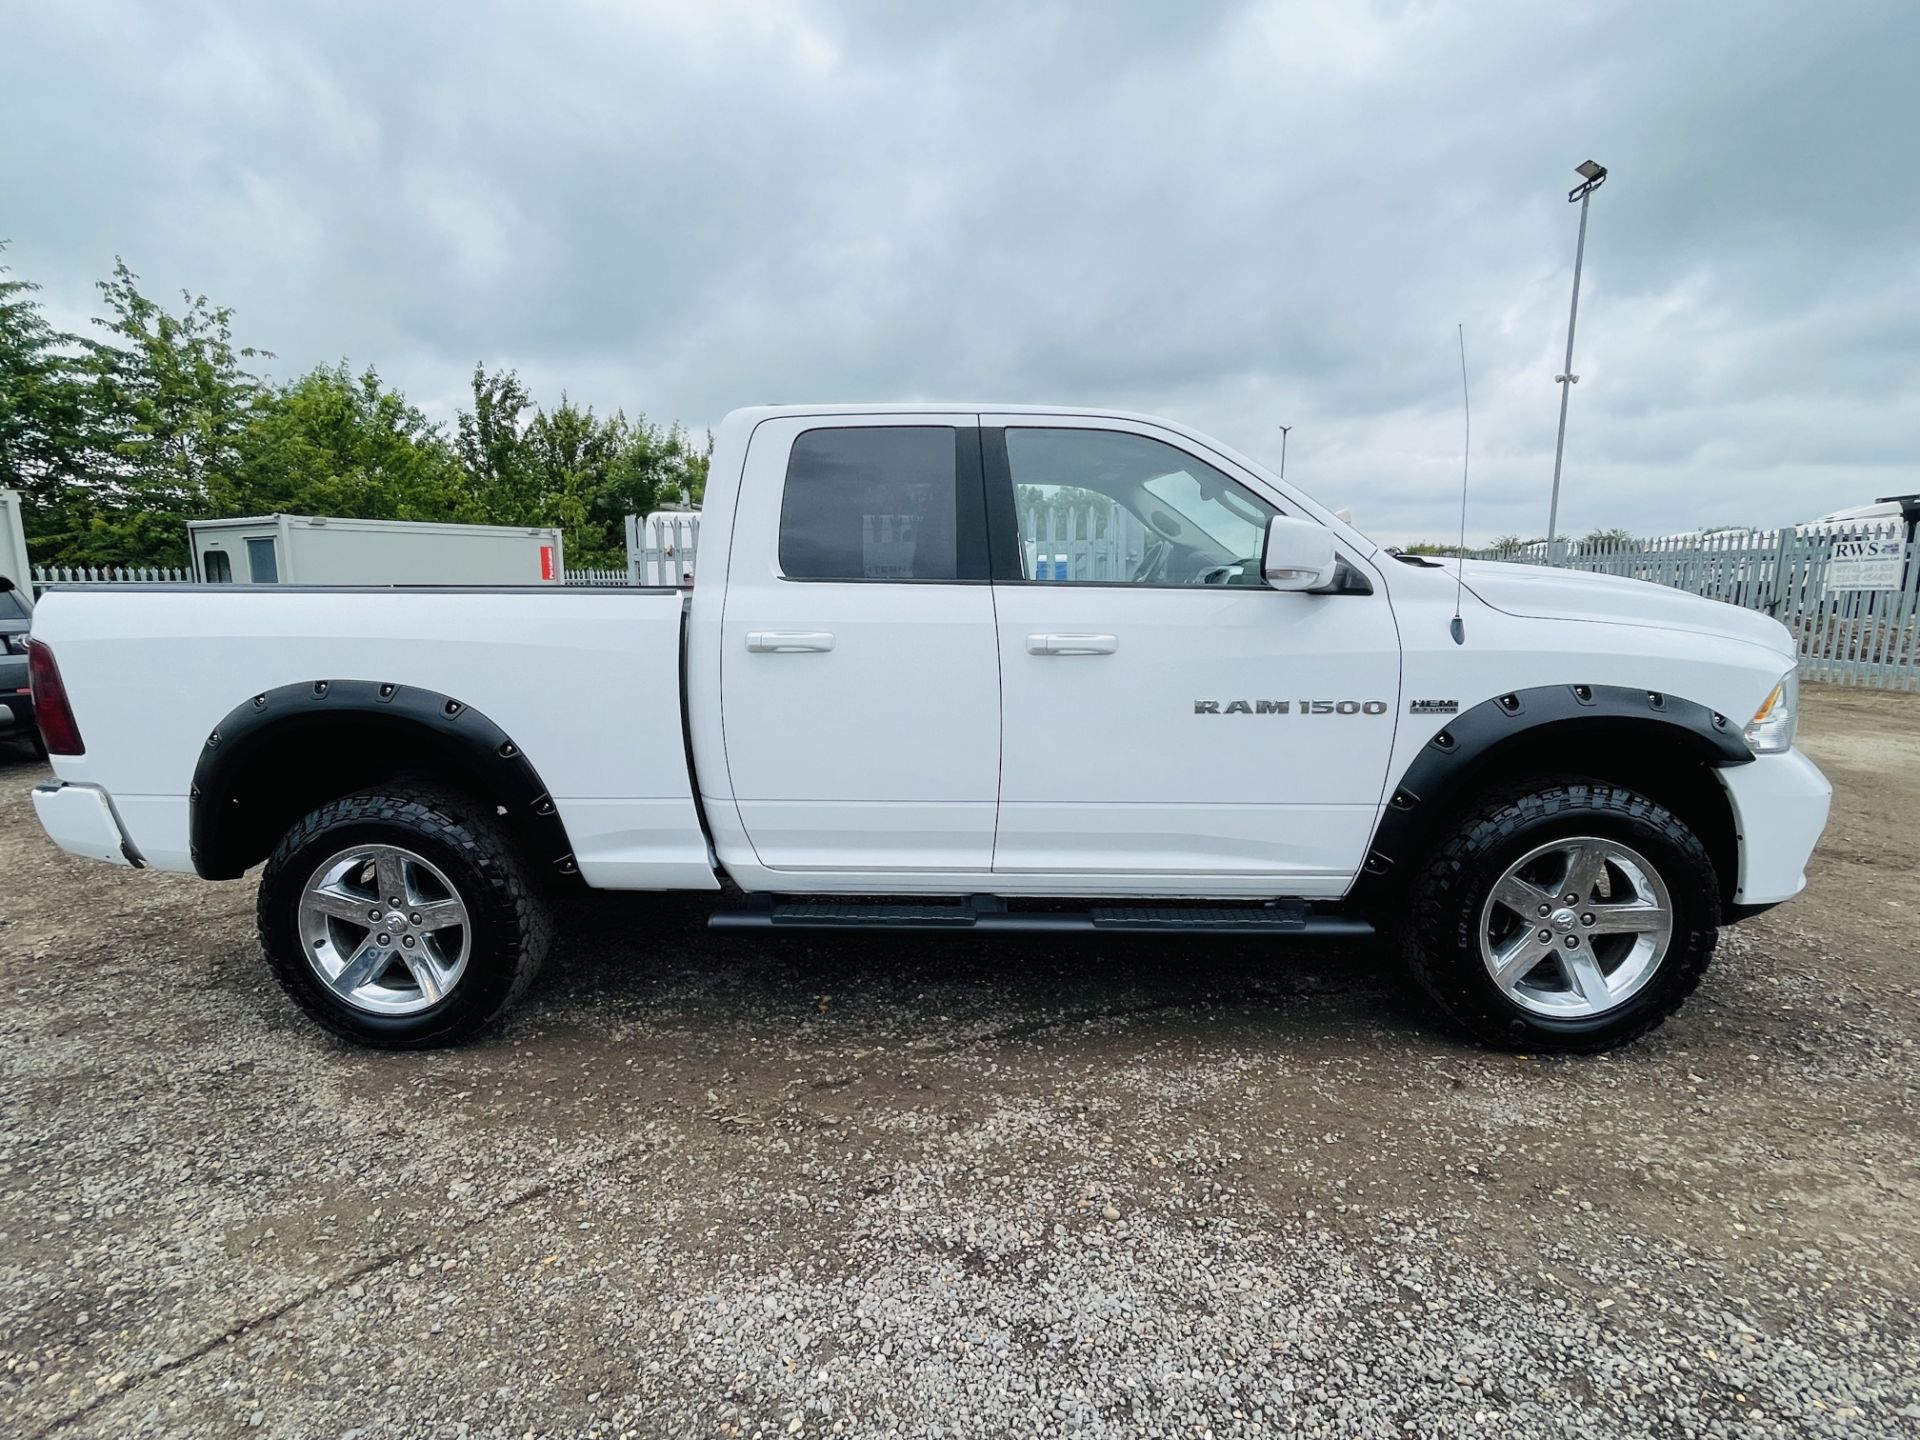 ** ON SALE ** Dodge Ram 5.7 Hemi V8 4x4 **Sport Edition** 2012 Year - Air con - Sport Pack - ** - Image 18 of 26